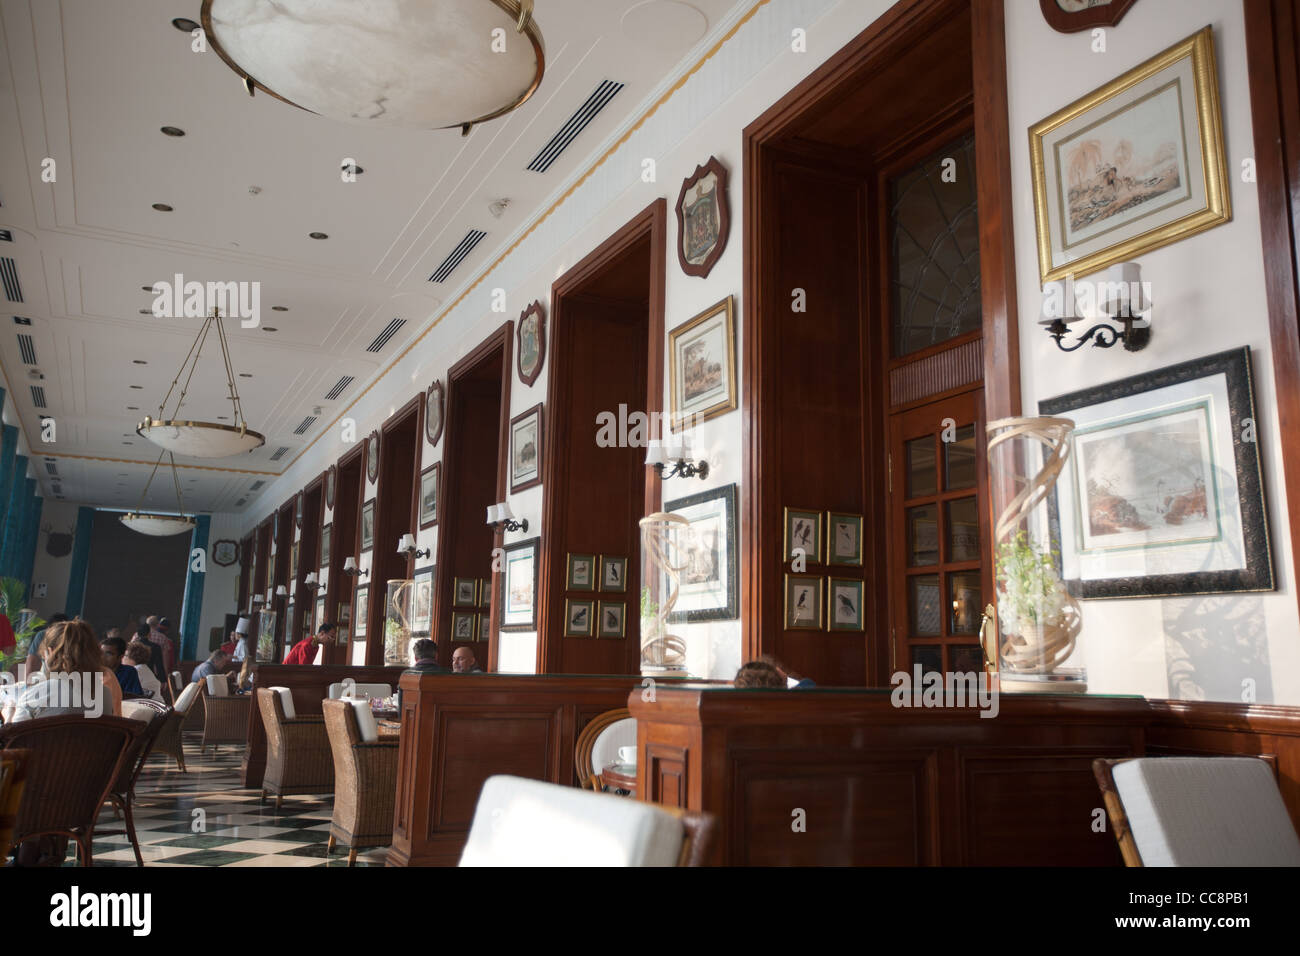 The Imperial Hotel, on Janpath, near Connaught Place, in New Delhi, India. Stock Photo